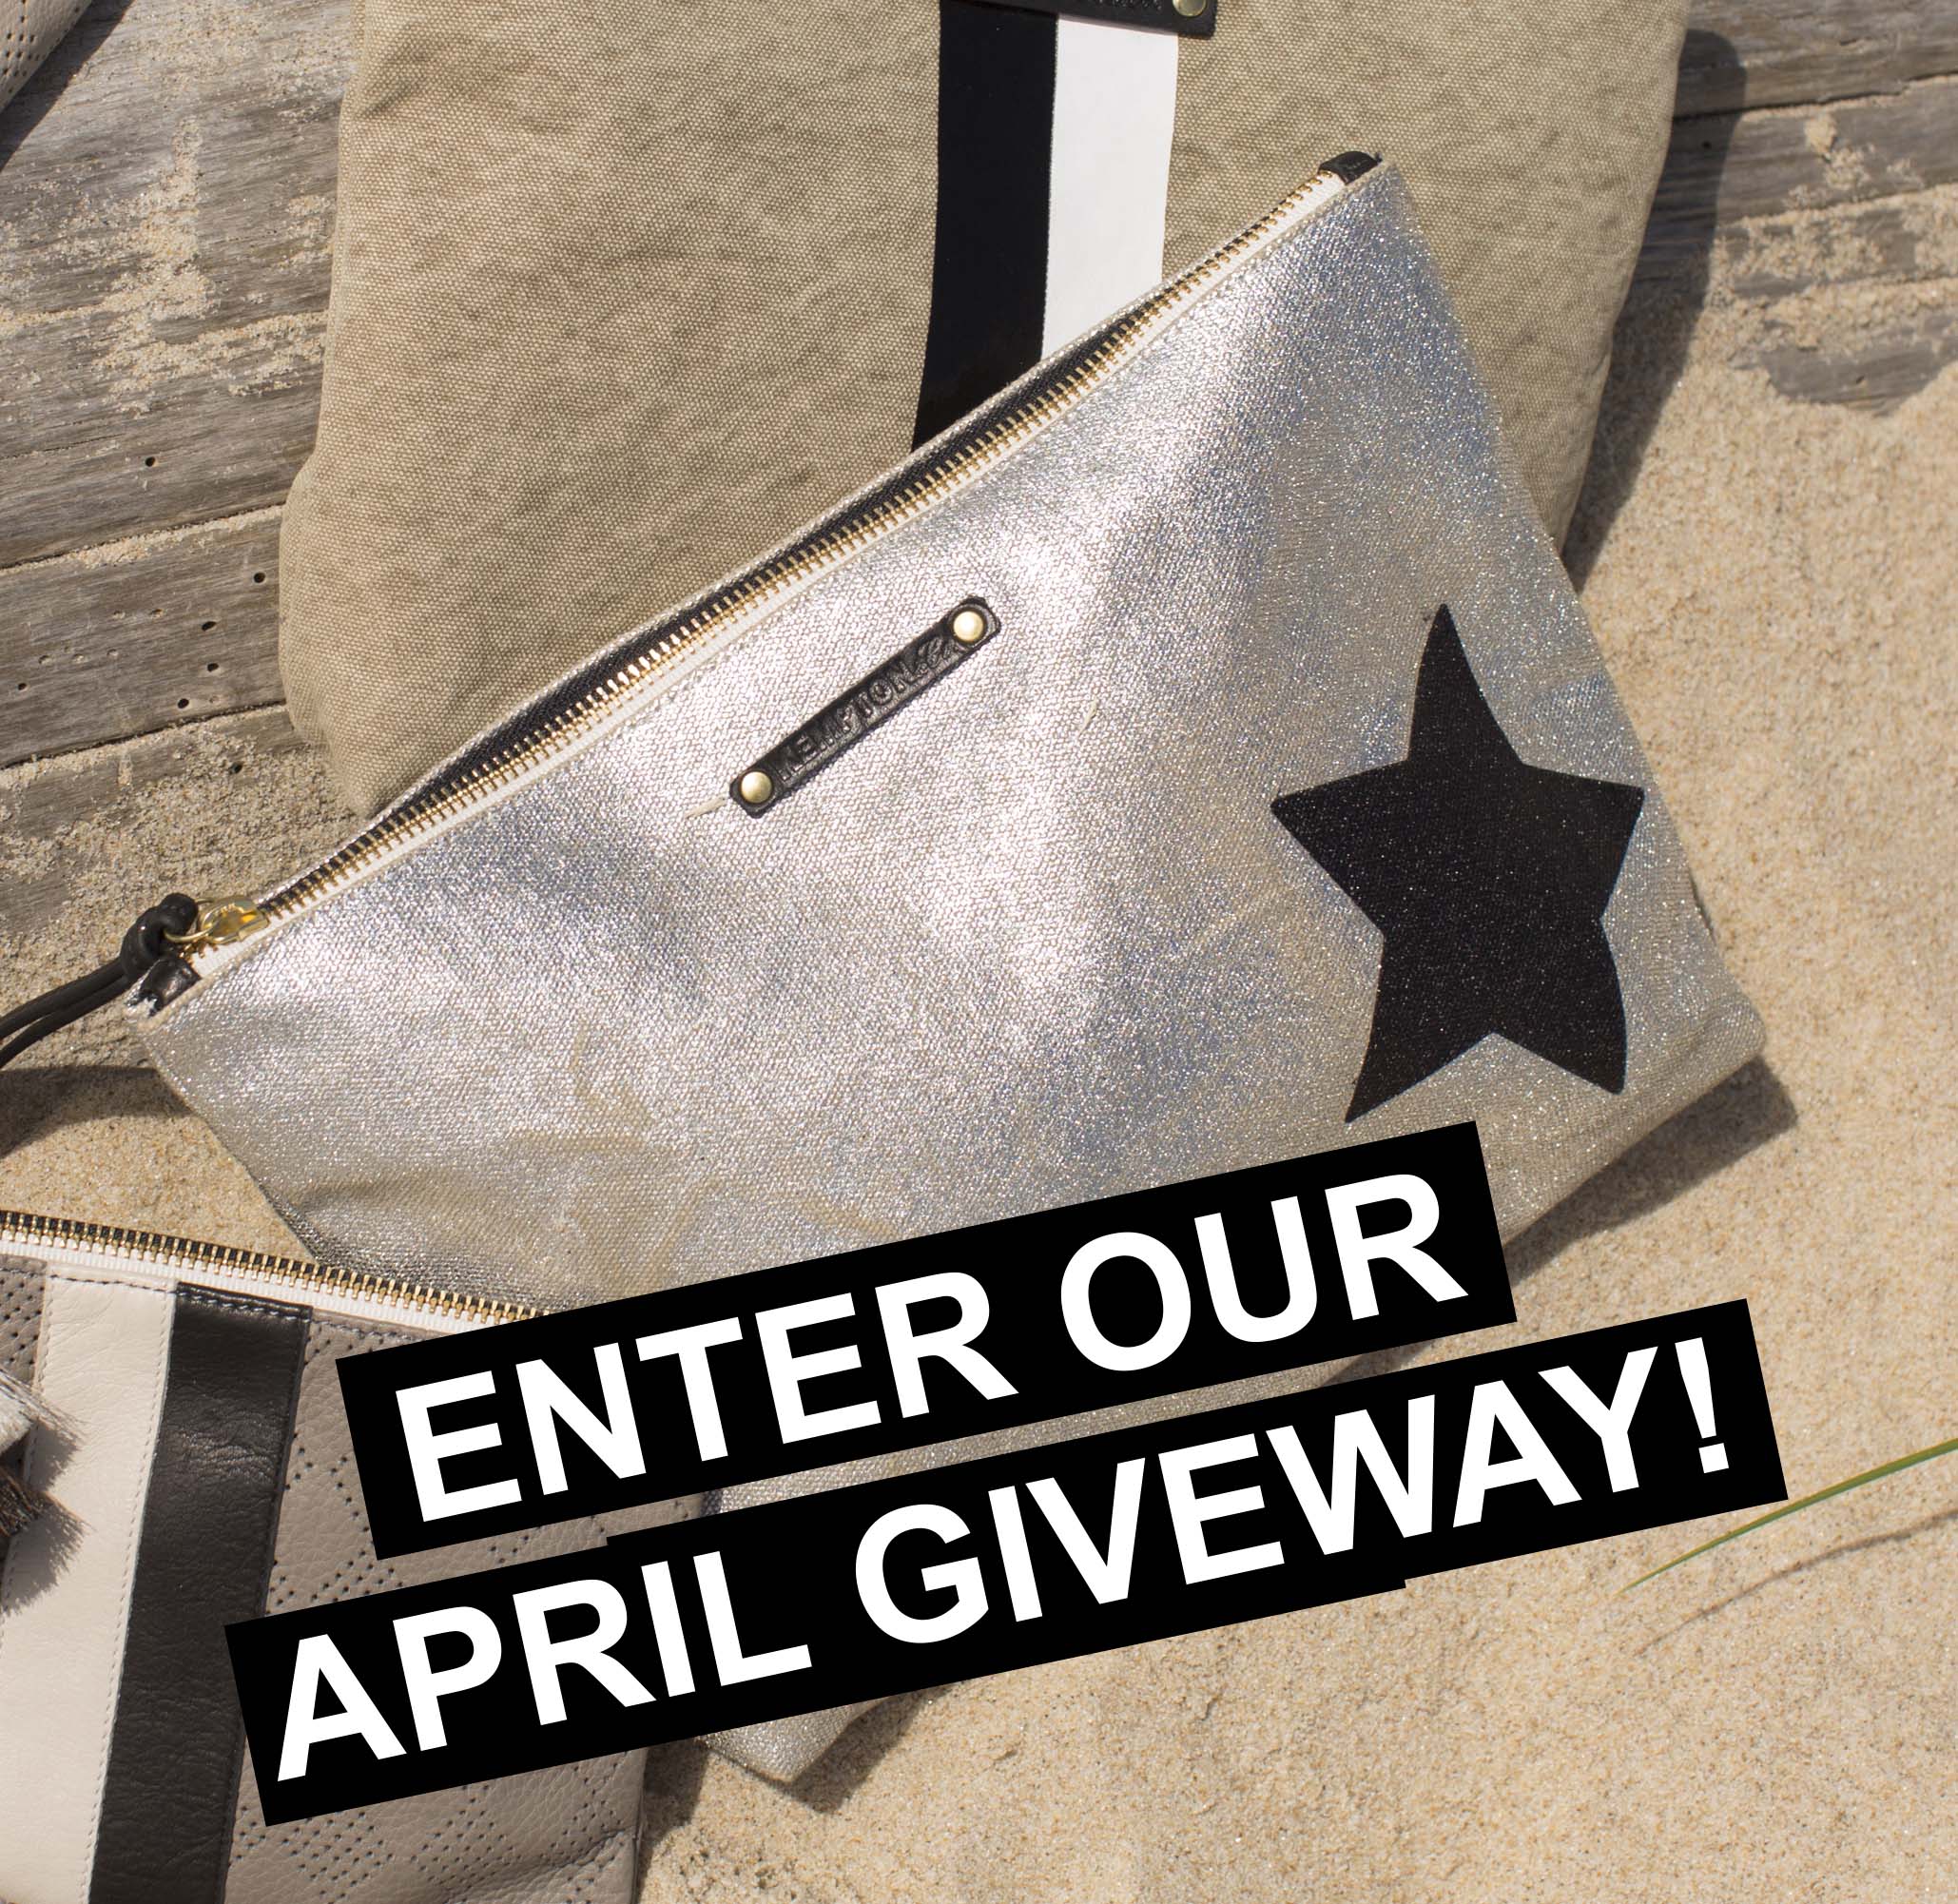 IT'S TIME FOR OUR APRIL GIVEAWAY!